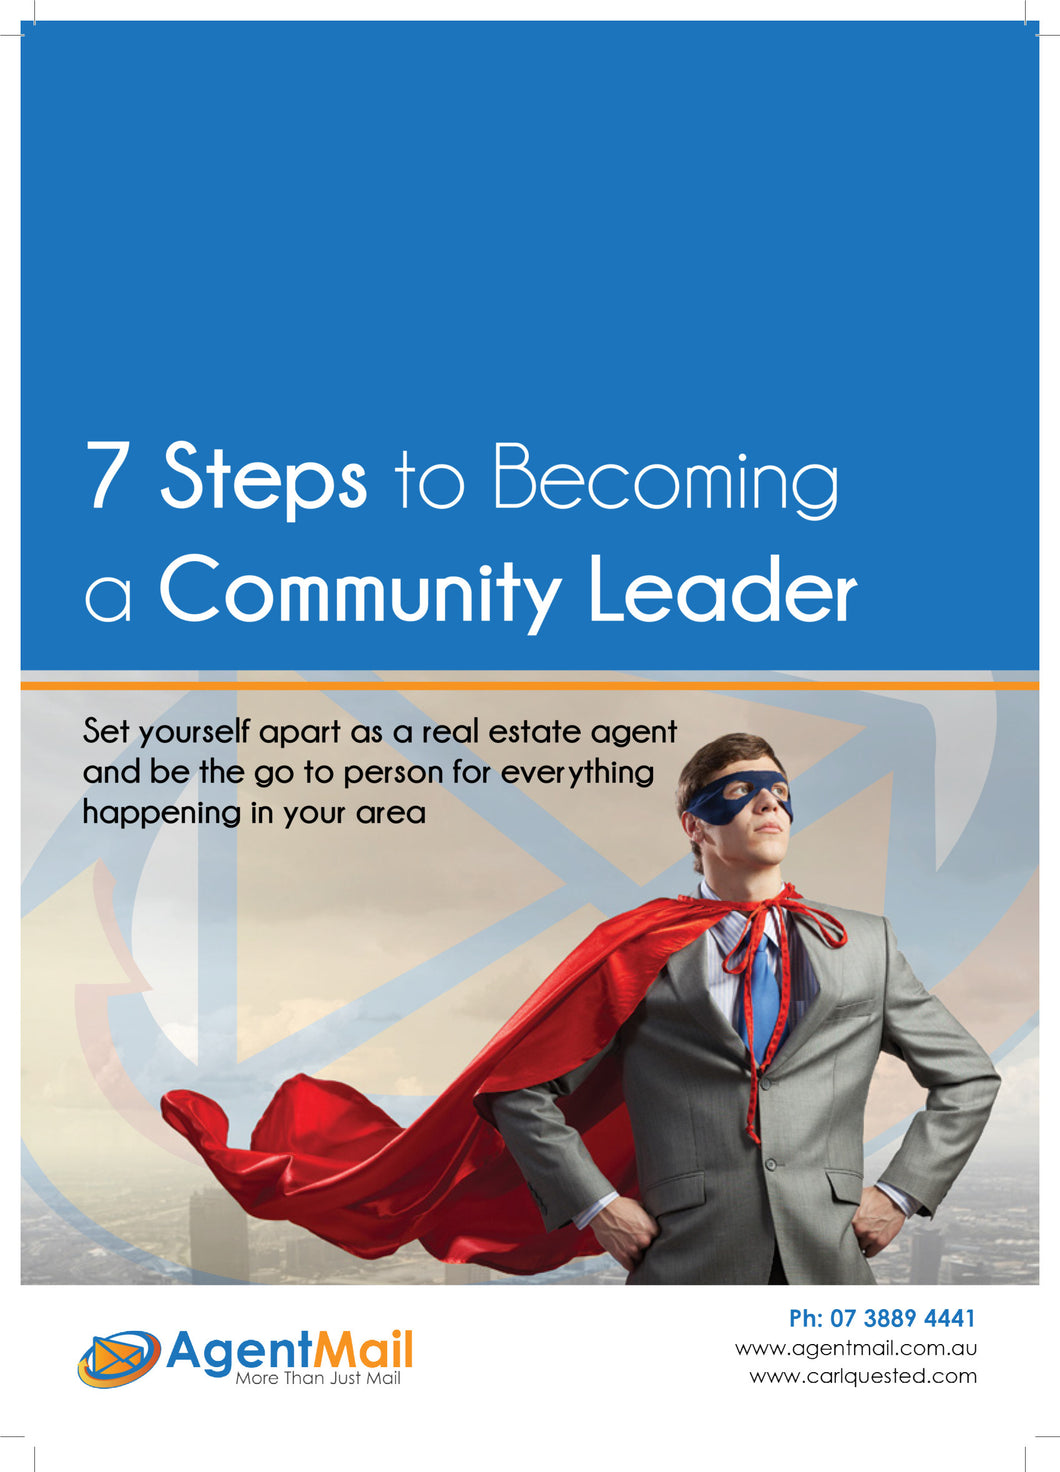 7 Steps to Becoming a Community Leader - Ebook